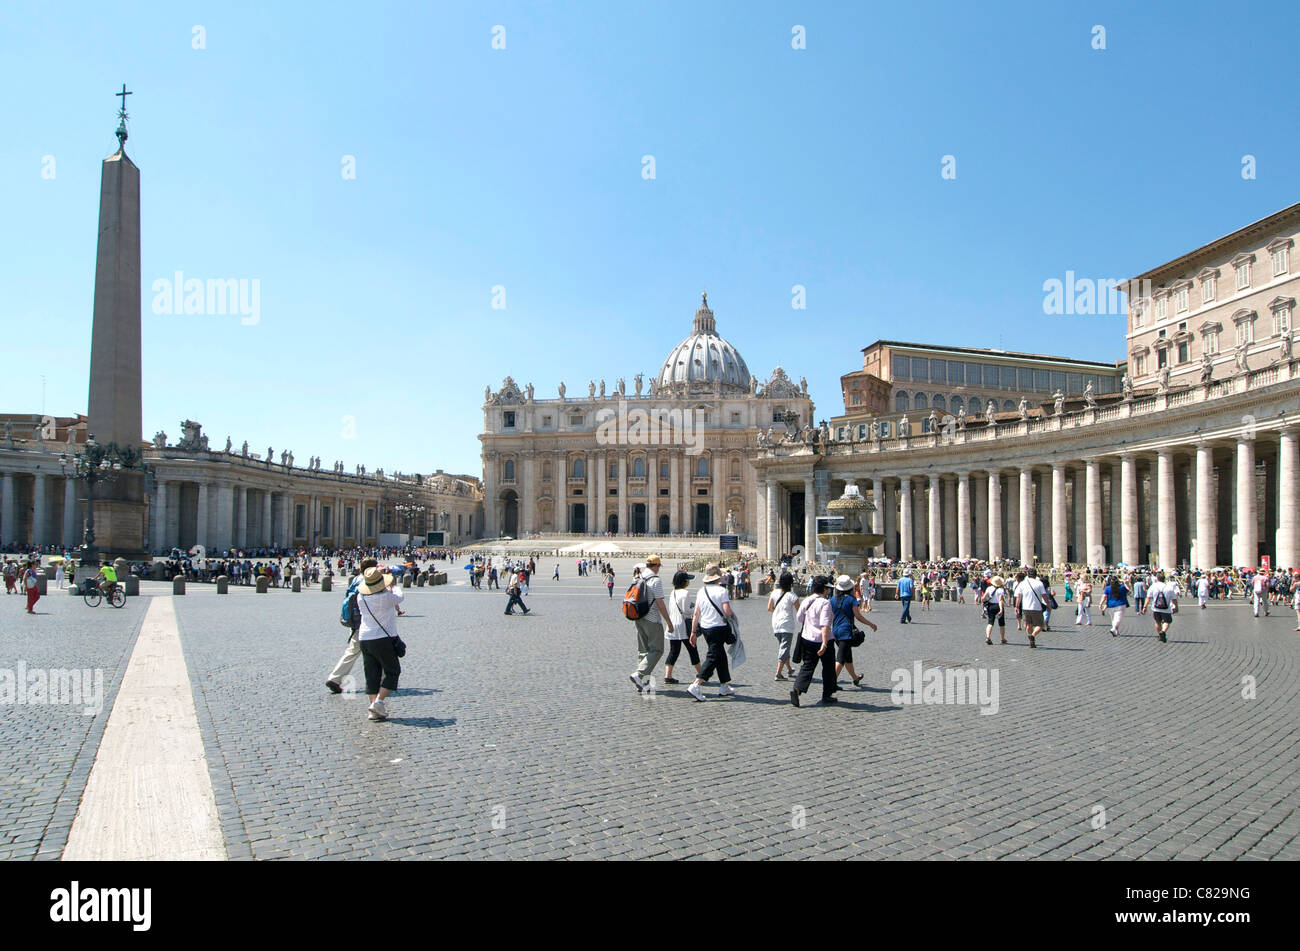 St Peter's Square, Vatican City, Rome, Italy, Europe Stock Photo